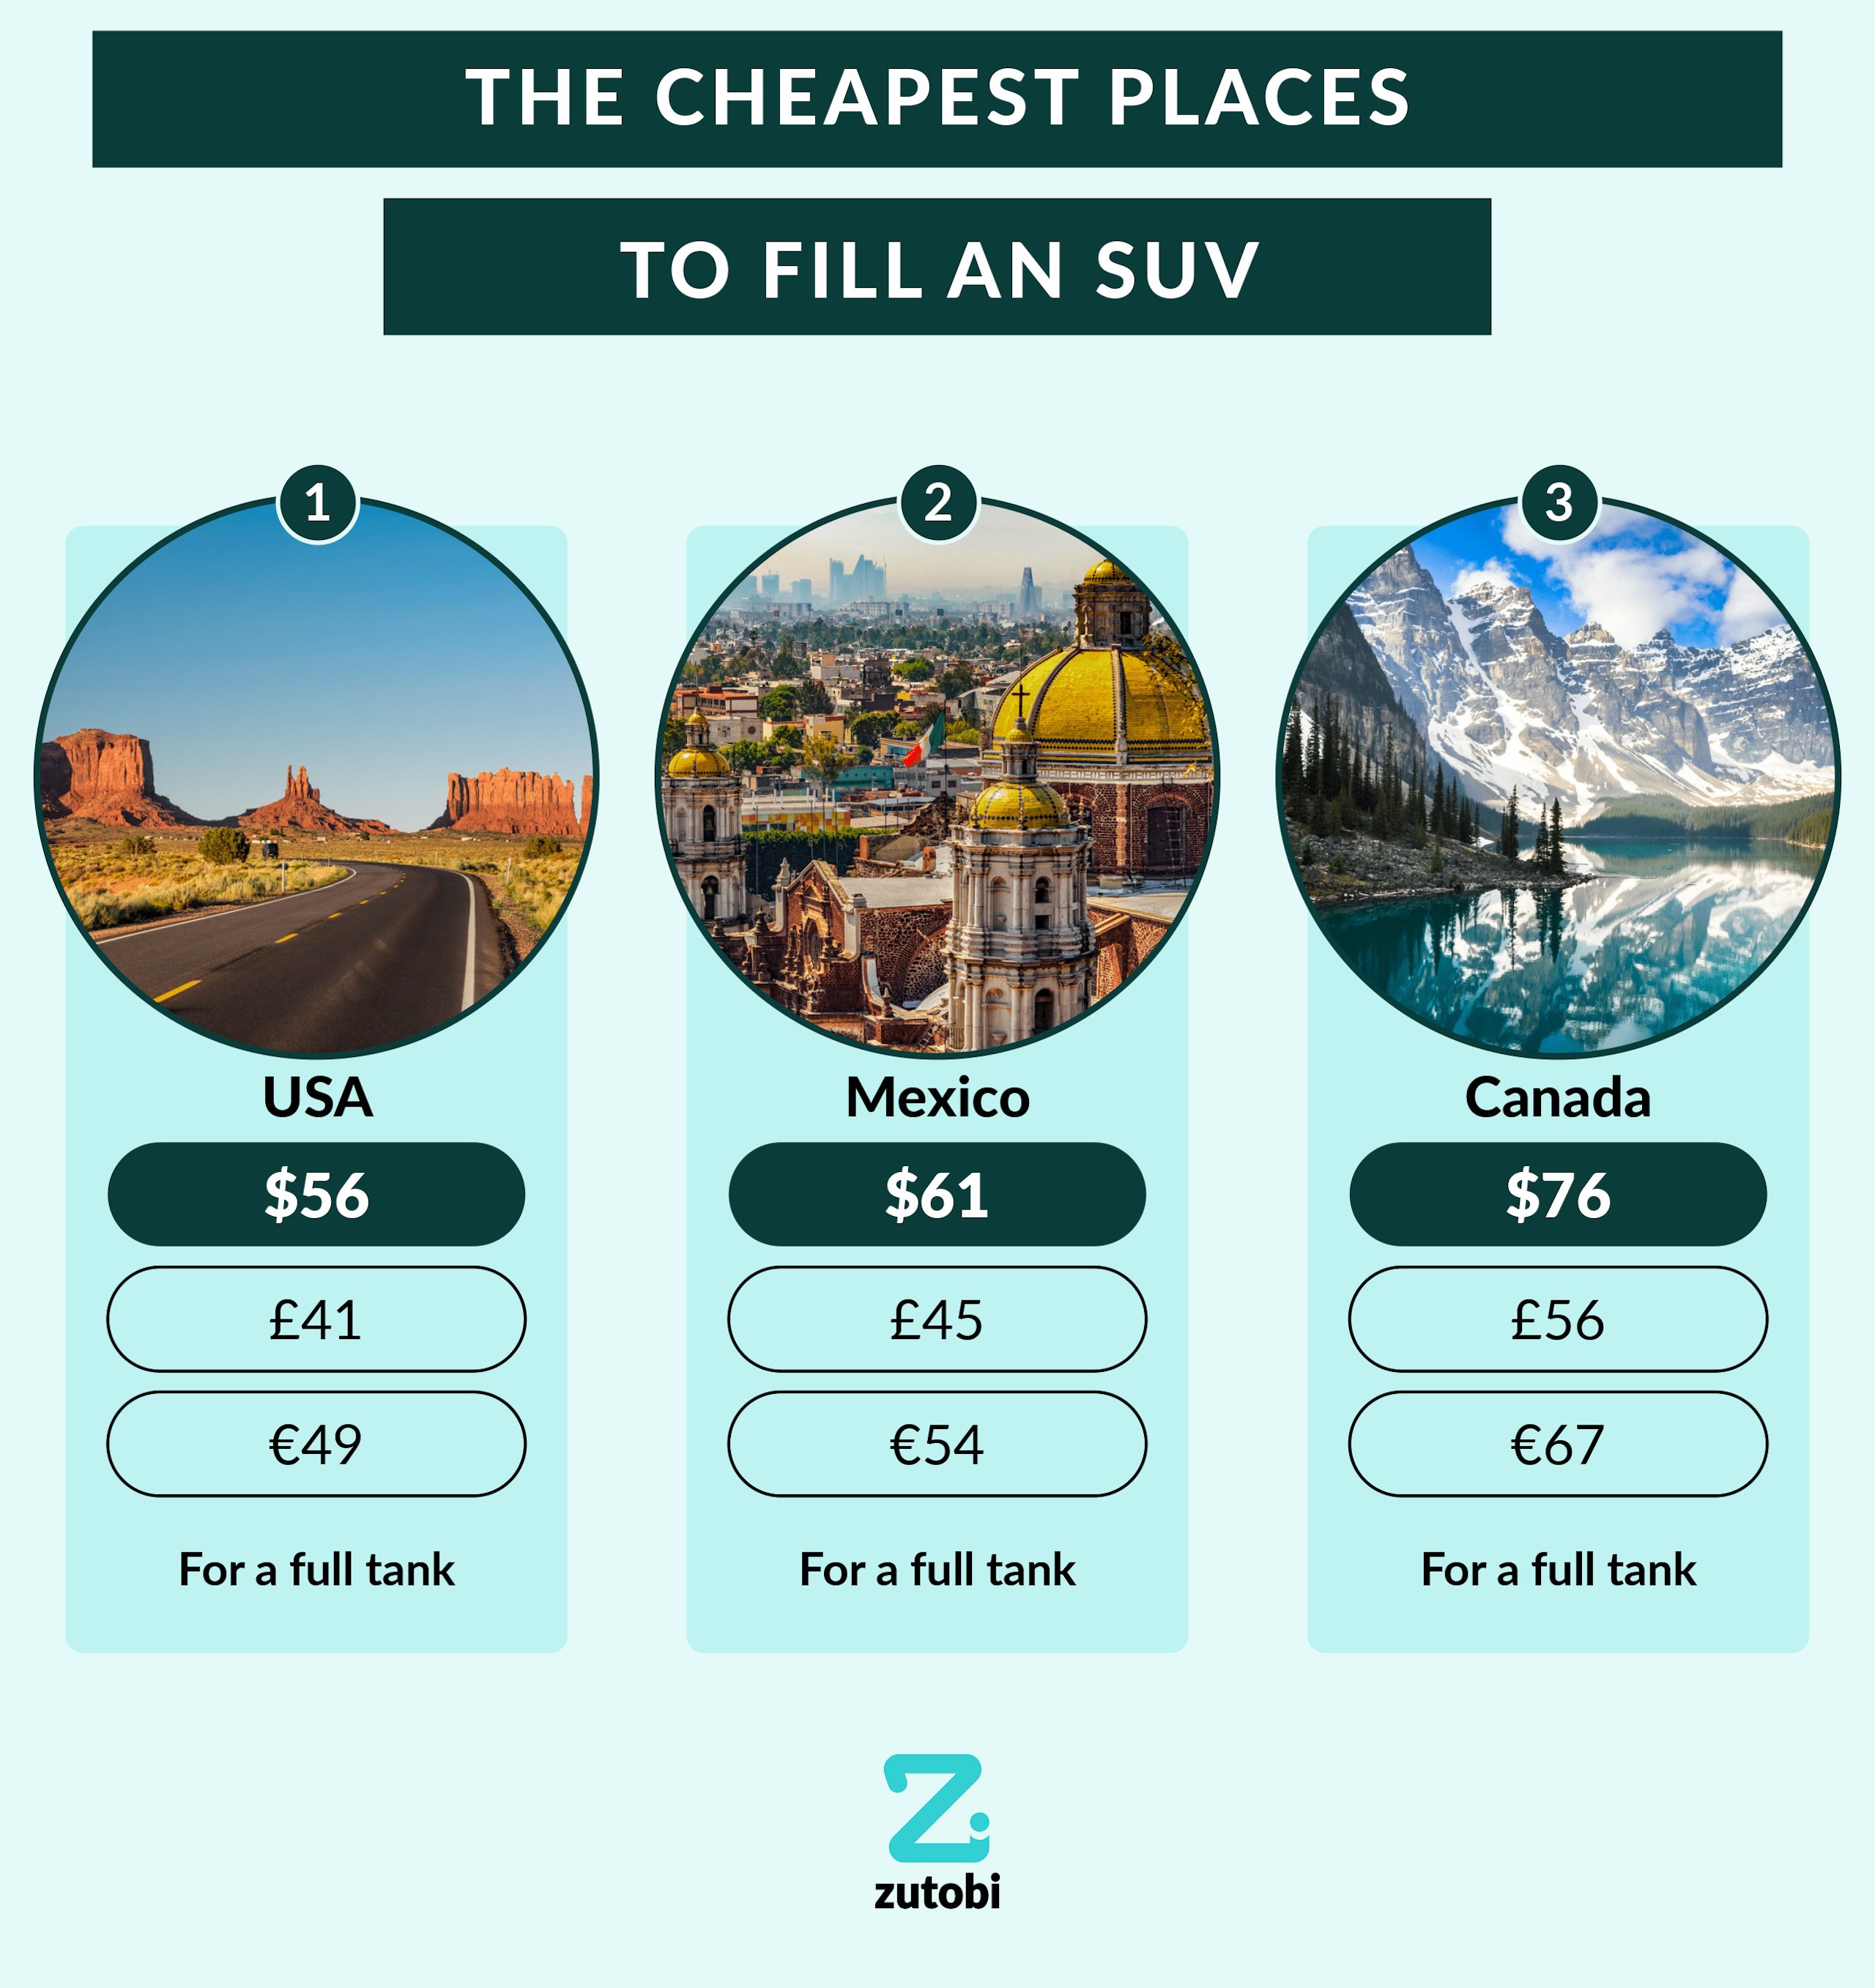 The Cheapest Places to Fill an SUV